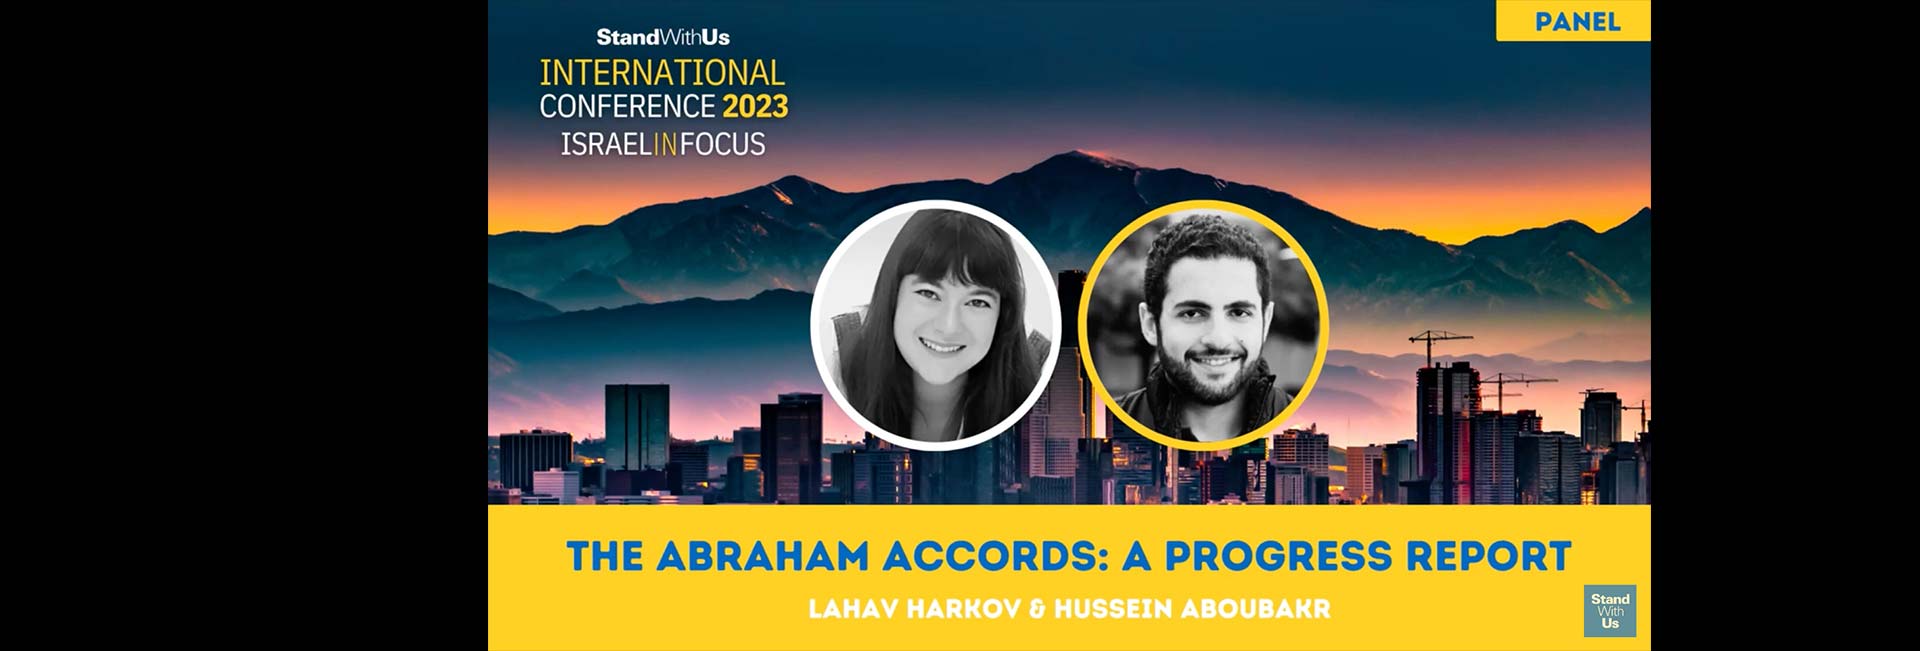 StandWithUs International Conference 2023: The Abraham Accords — A Progress Report